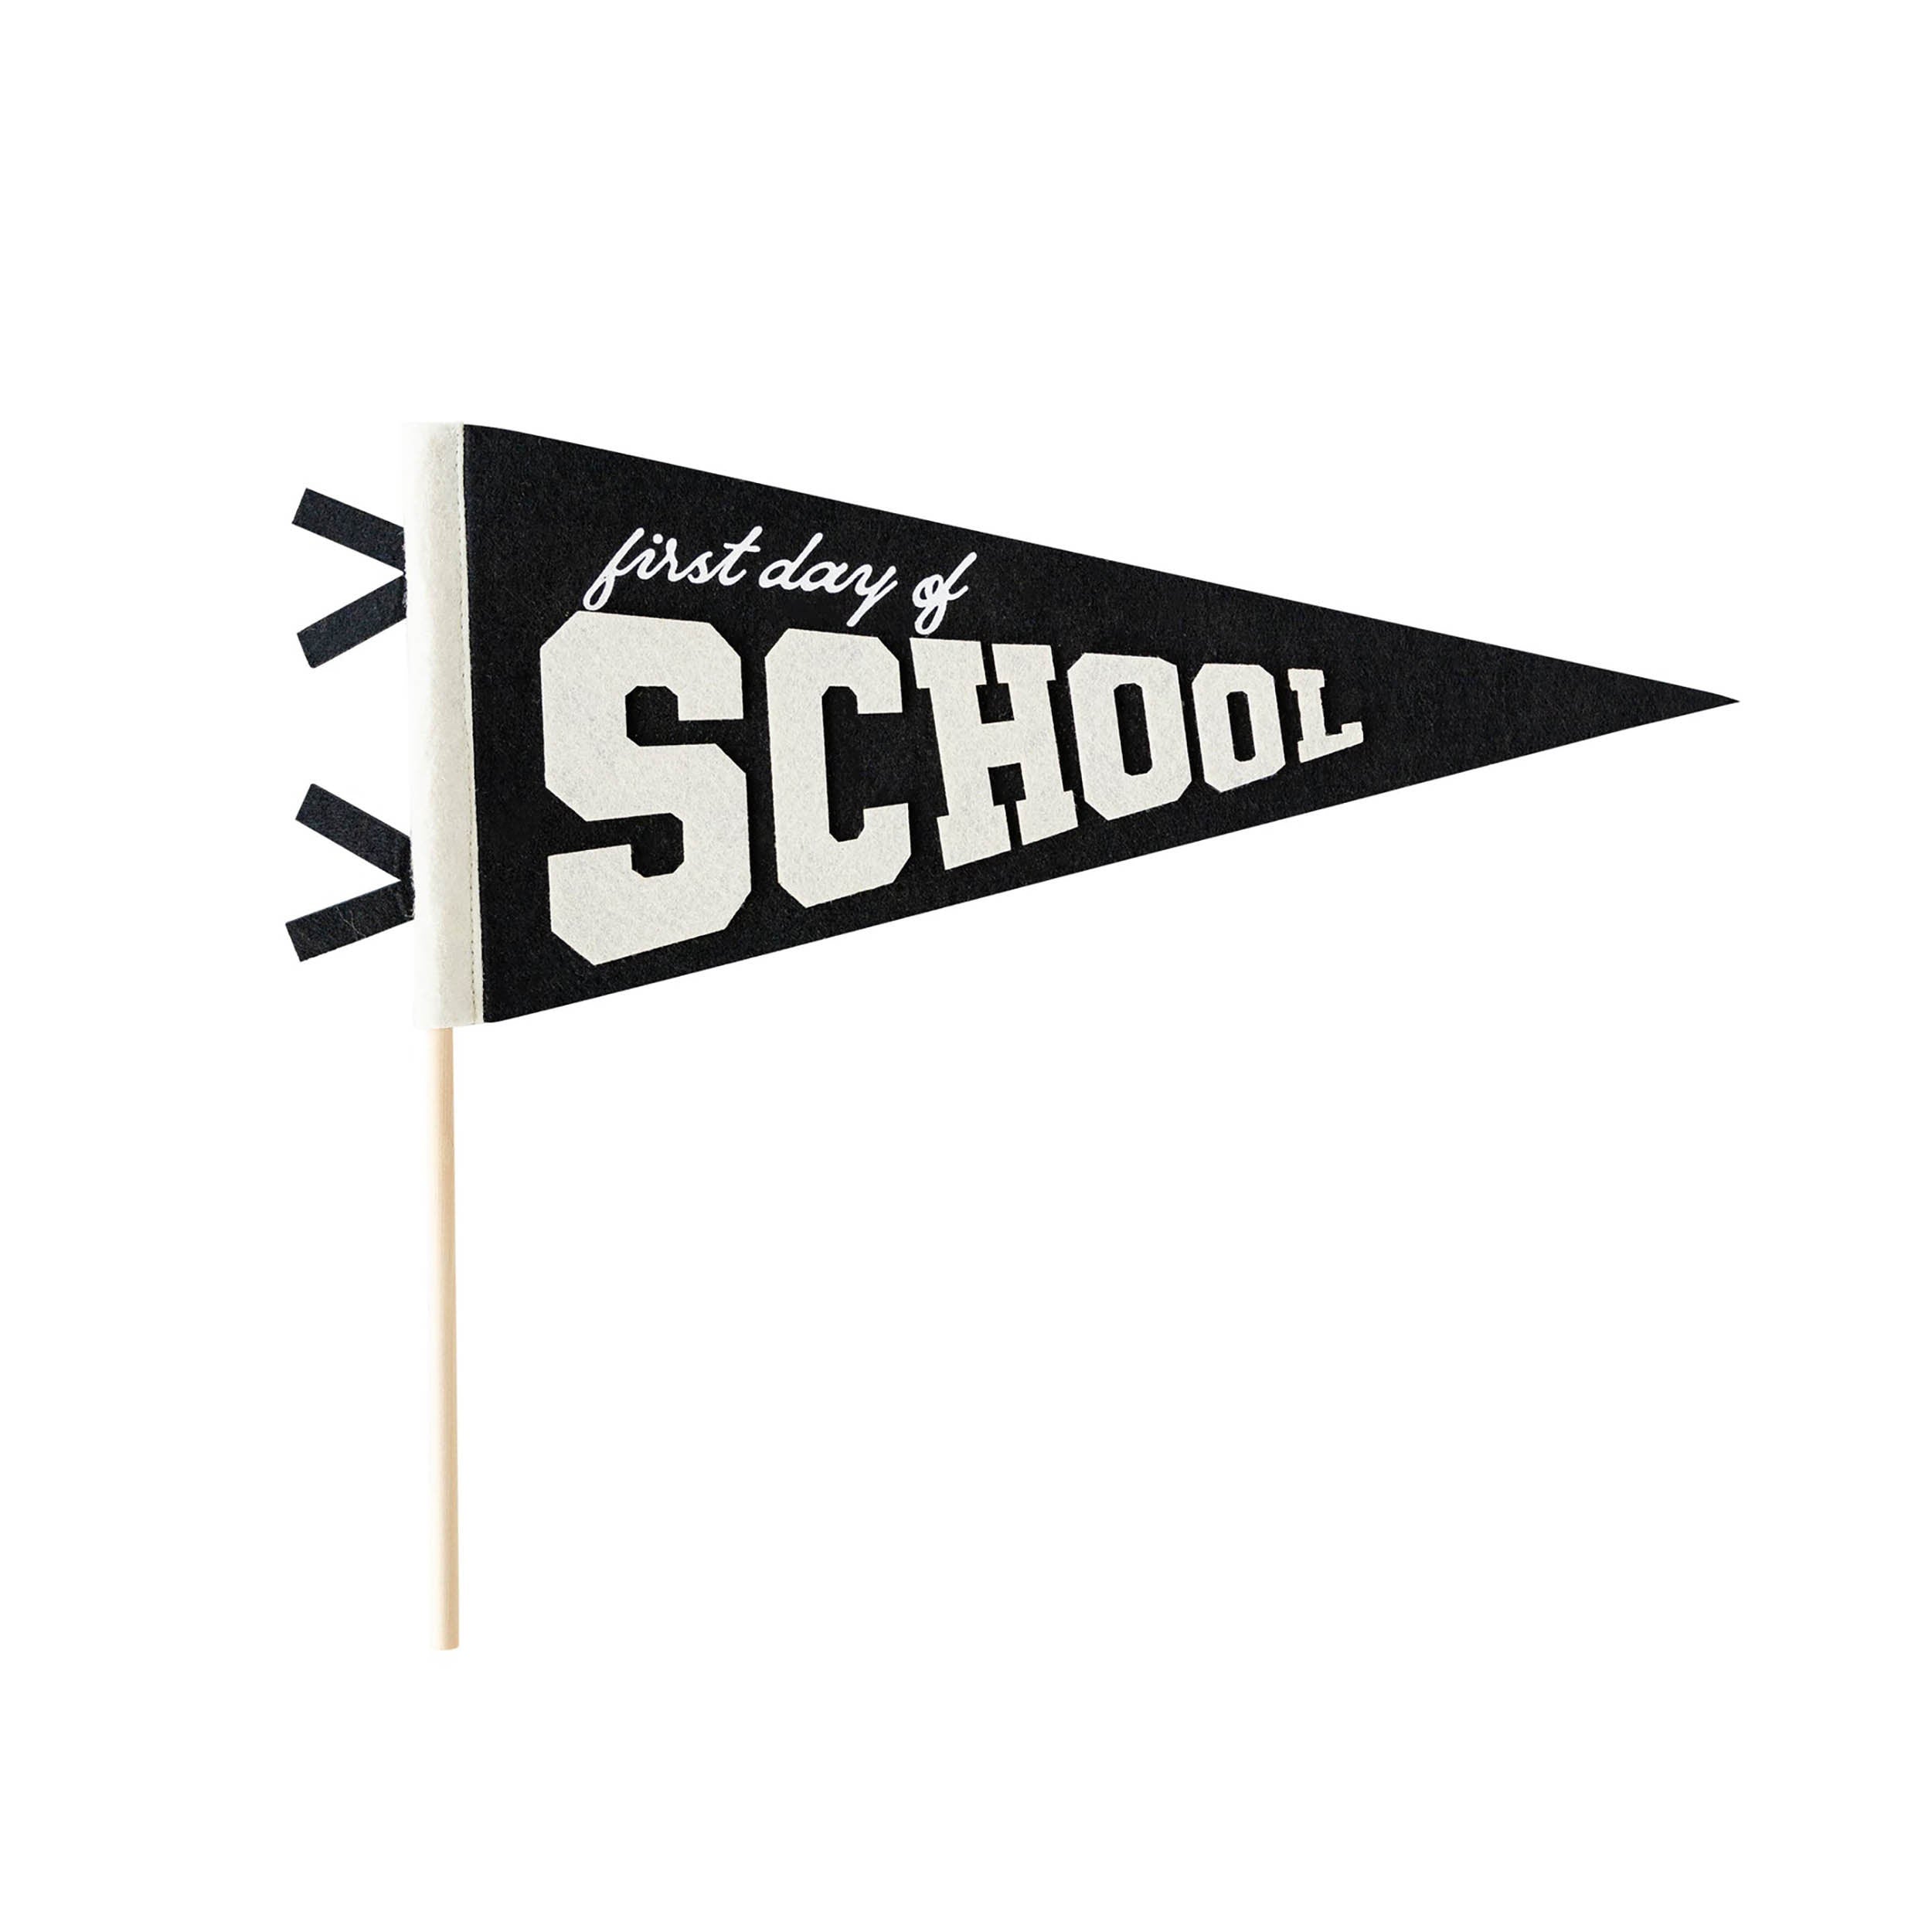 First Day of School - Pennant Flag - First day of School Picture Ideas - Back to School Party Ideas - First Day of Kindergarten